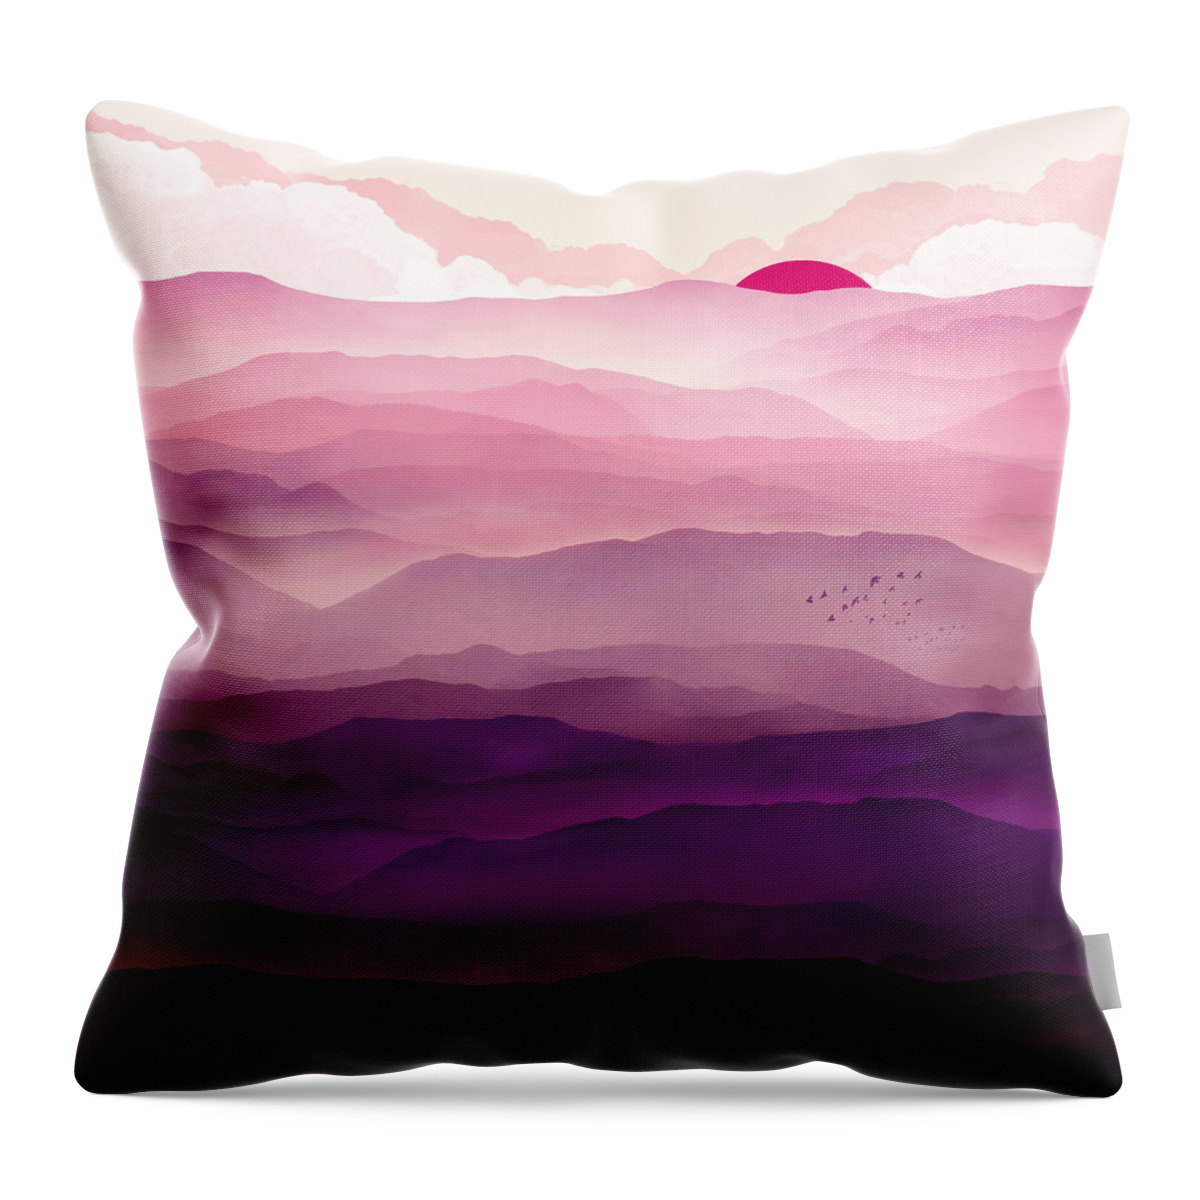 Violet Throw Pillow featuring the digital art Ultraviolet Day by Spacefrog Designs